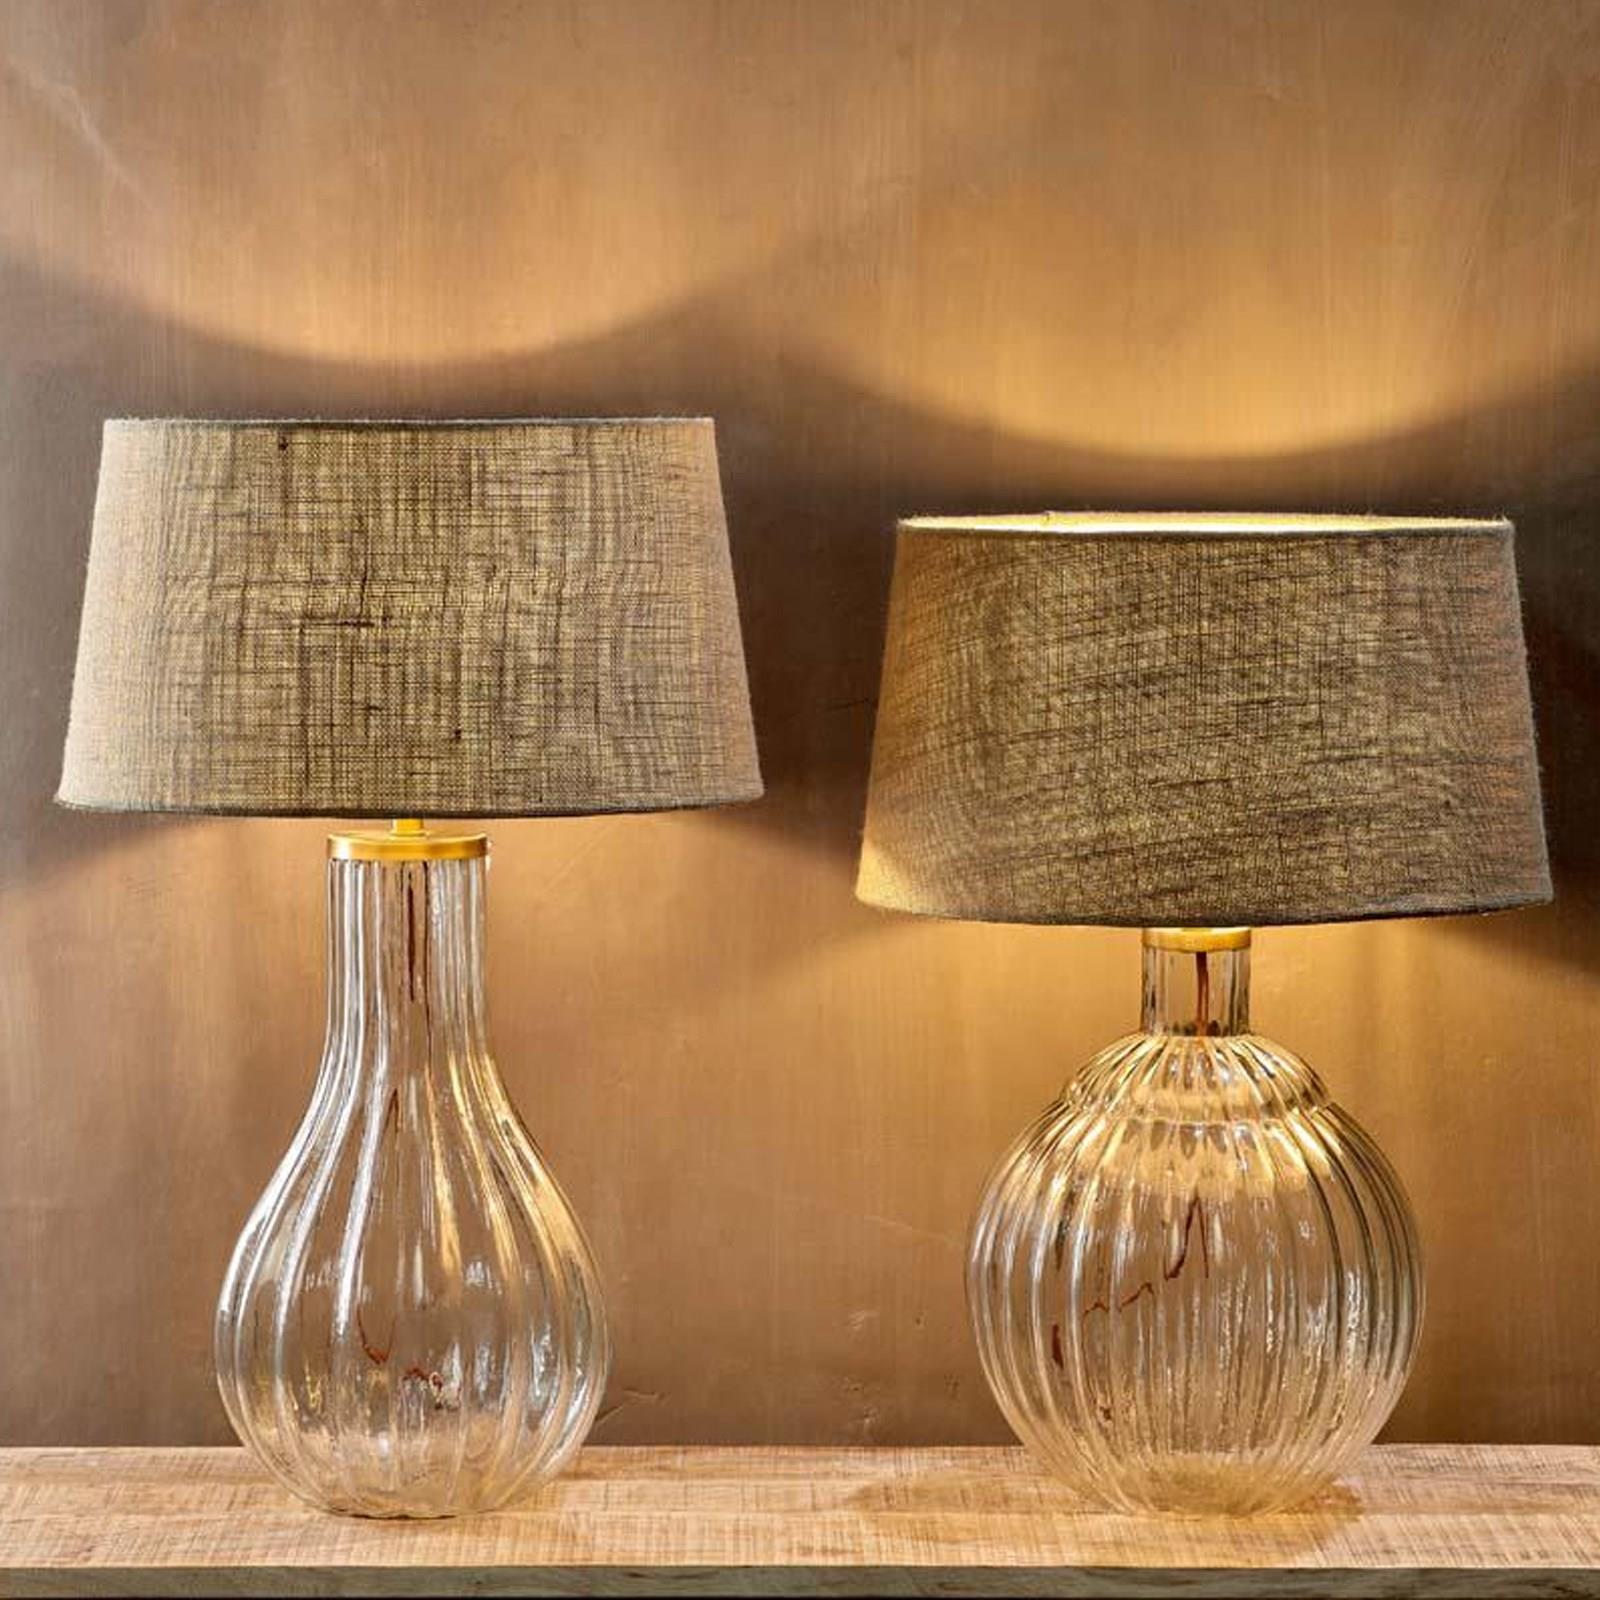 The Perfect Pair - How To Pick a Shade for your Lamp